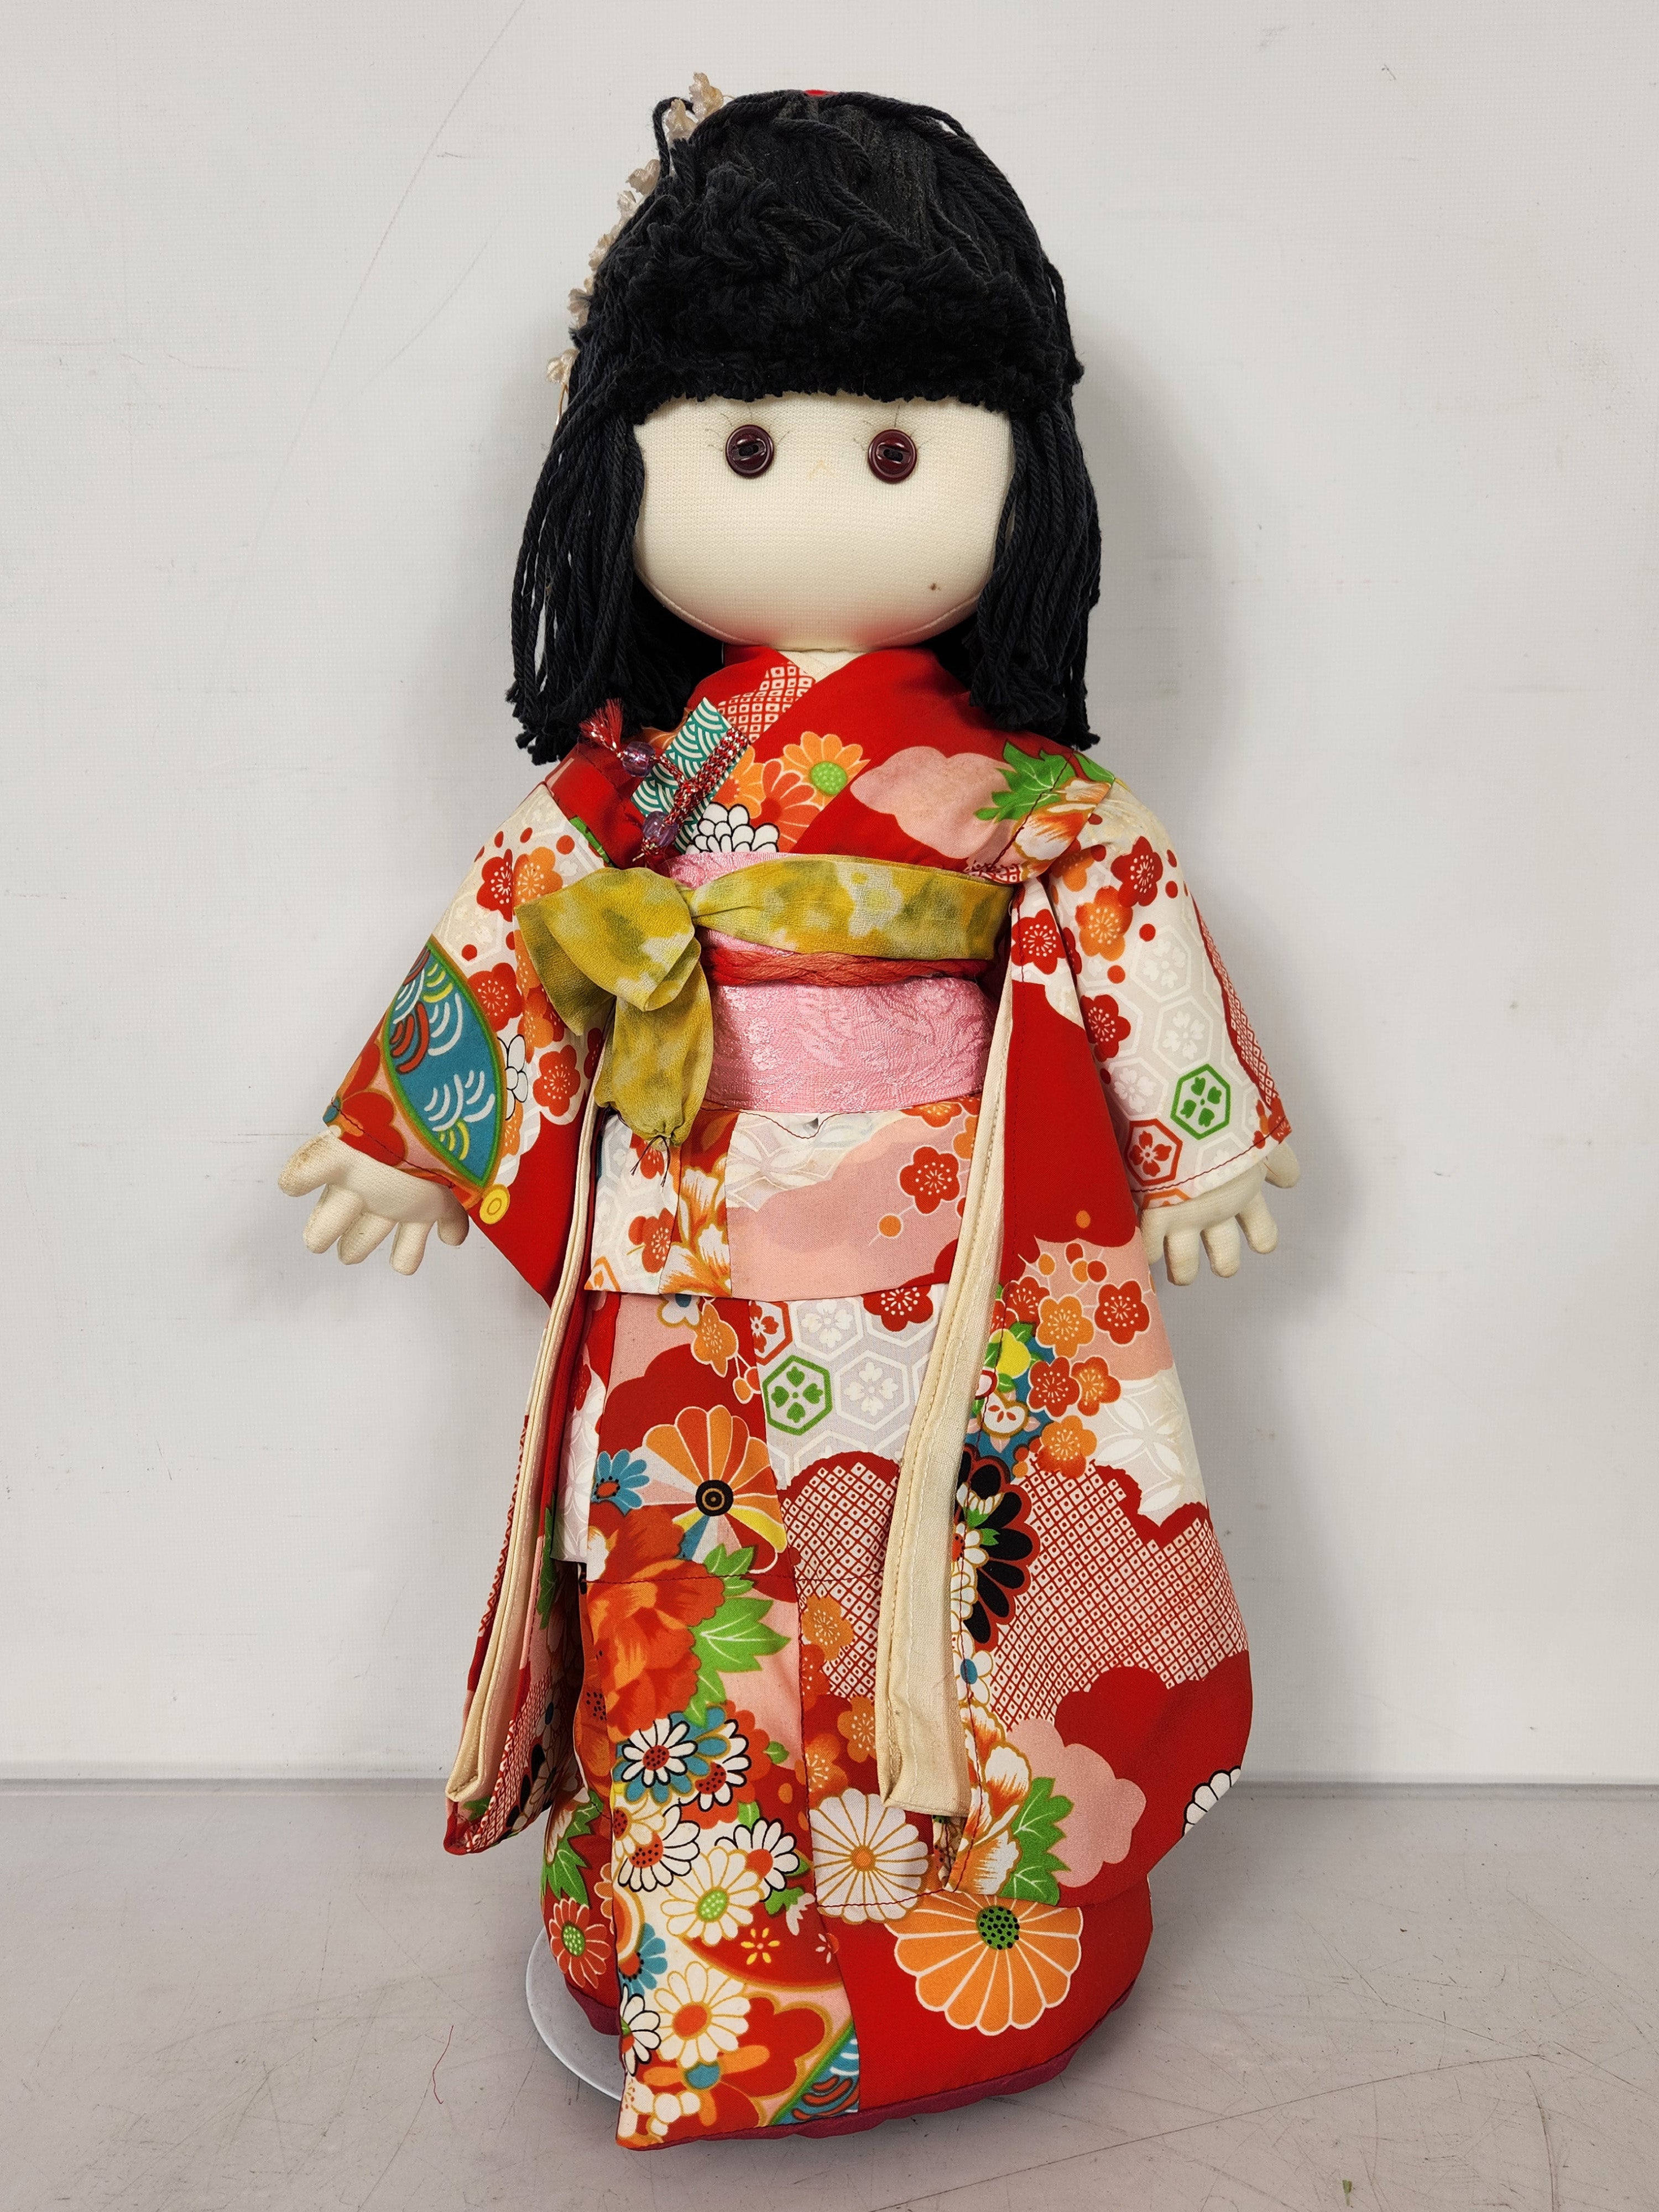 Hand-made Doll on Stand by Daisy Nakatsu